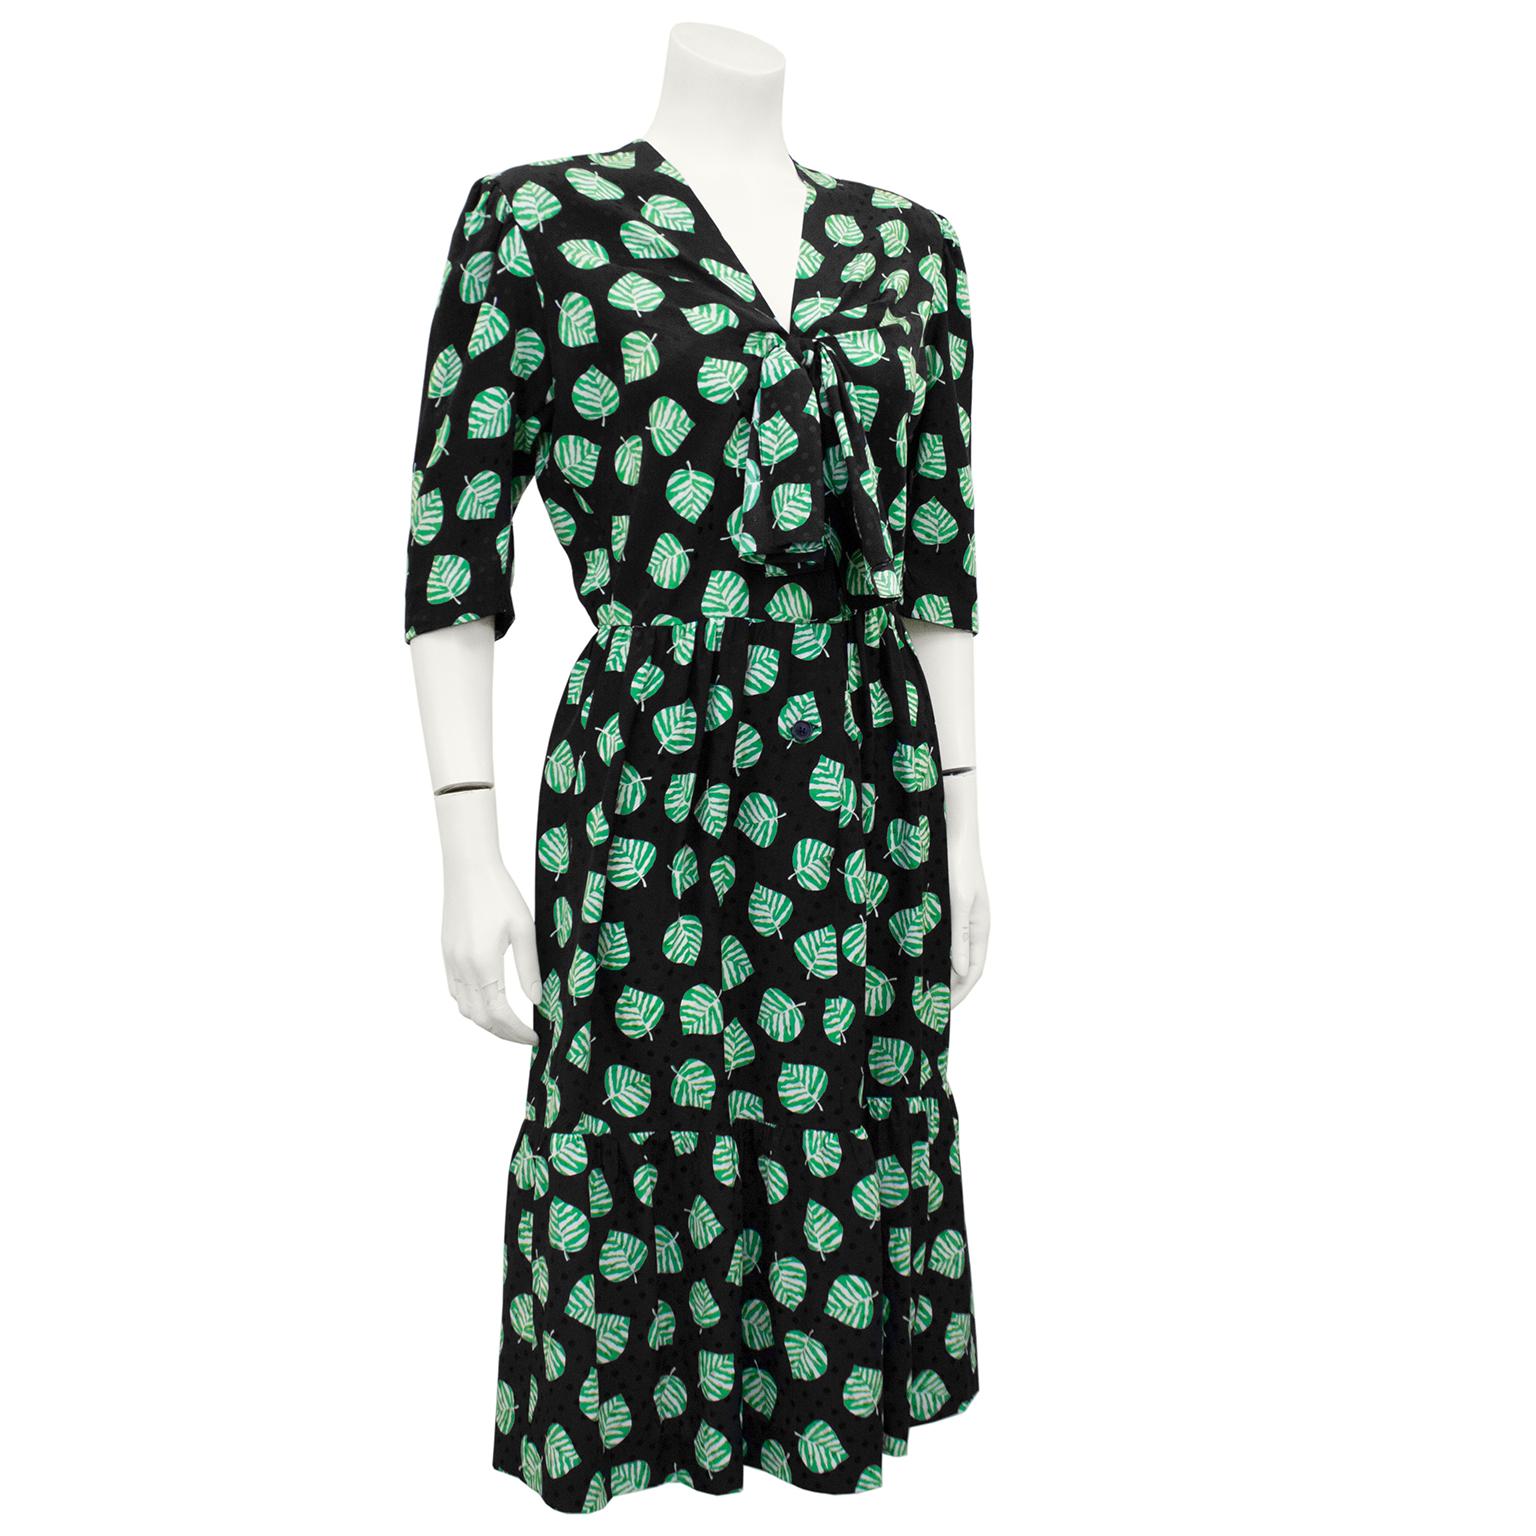 Givenchy dress from the 1980s. Black silk monochromatic jacquard polka dots throughout and contrasting green and white leaves. Small v neckline with twisted tie at bust. Short sleeves, fitted waist and mid length skirt. Excellent vintage condition.